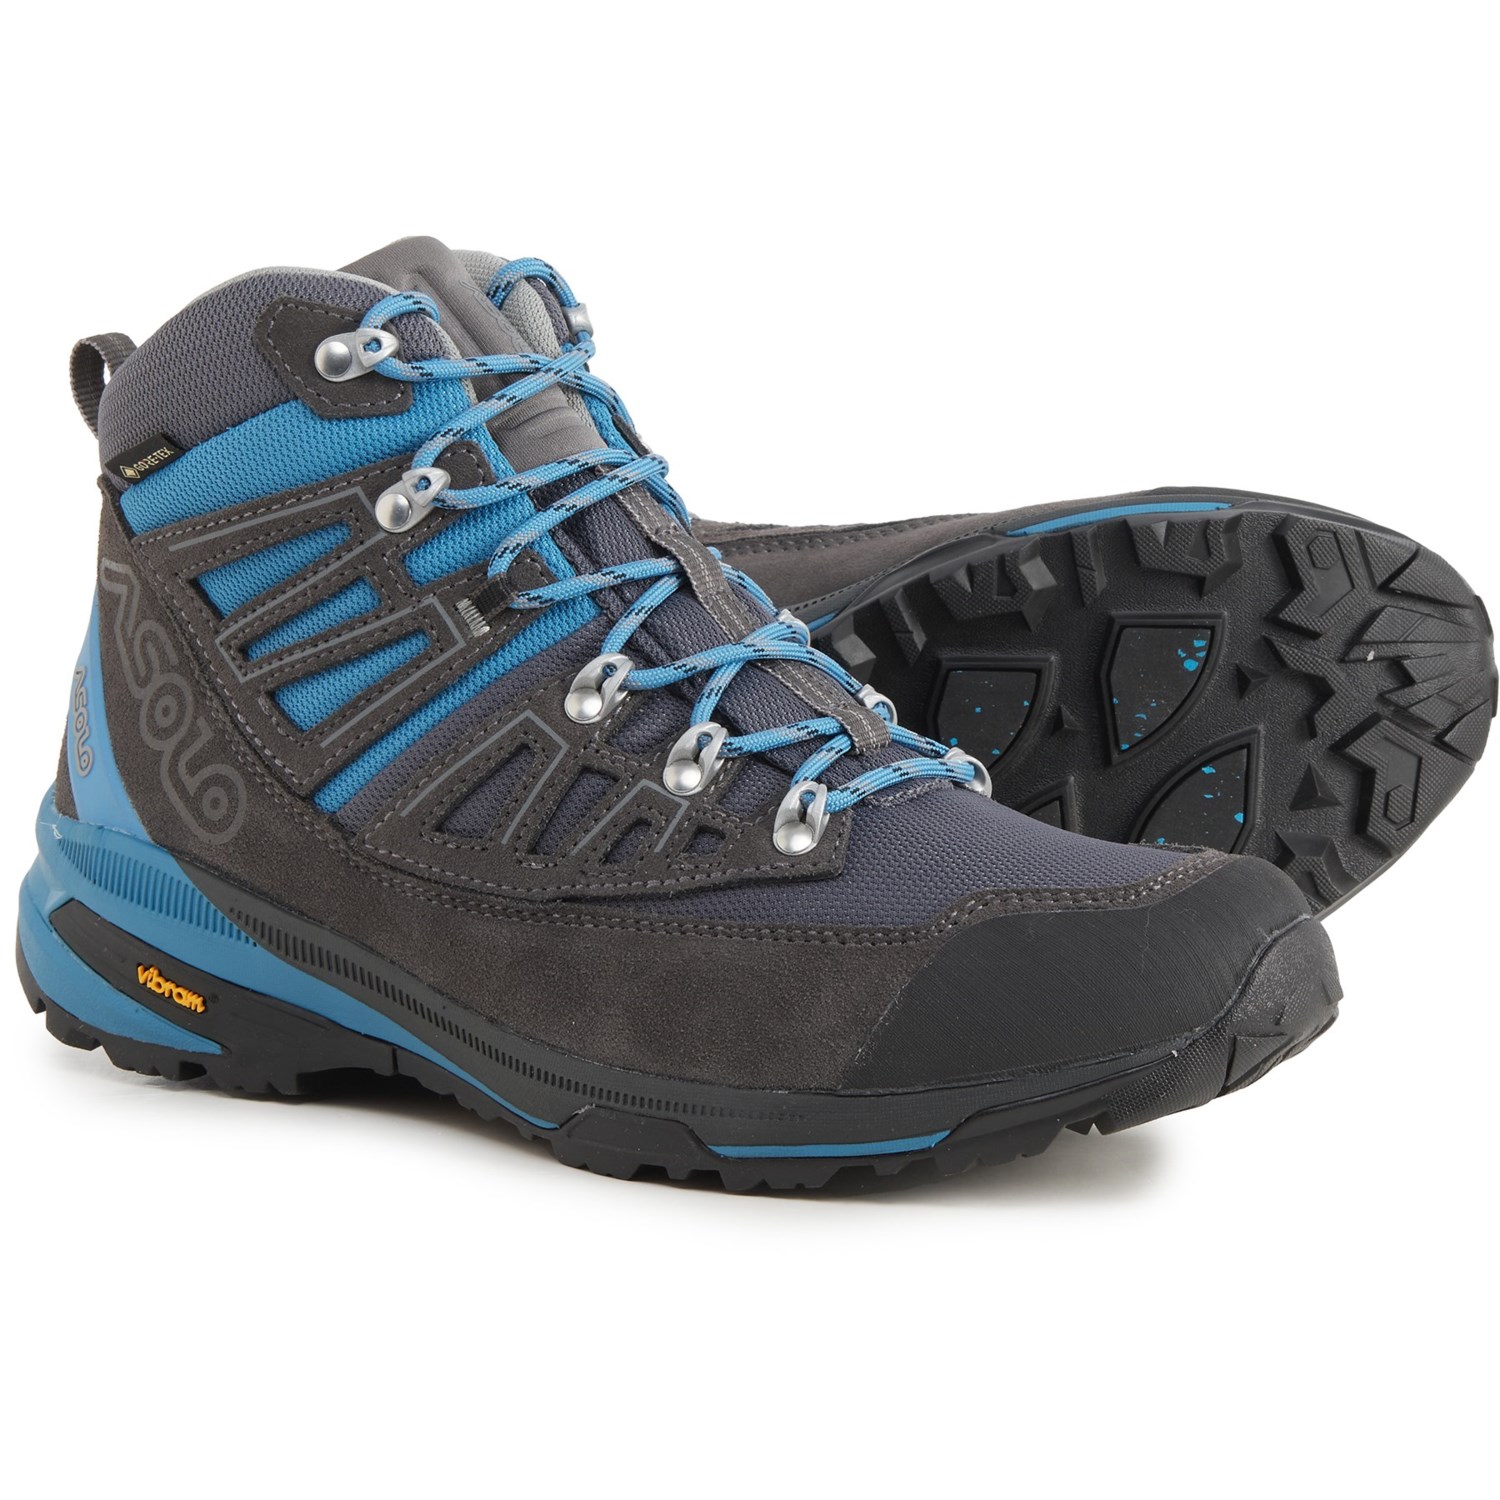 Asolo Narvik GV Gore-Tex Hiking Boots - Waterproof (For Women)